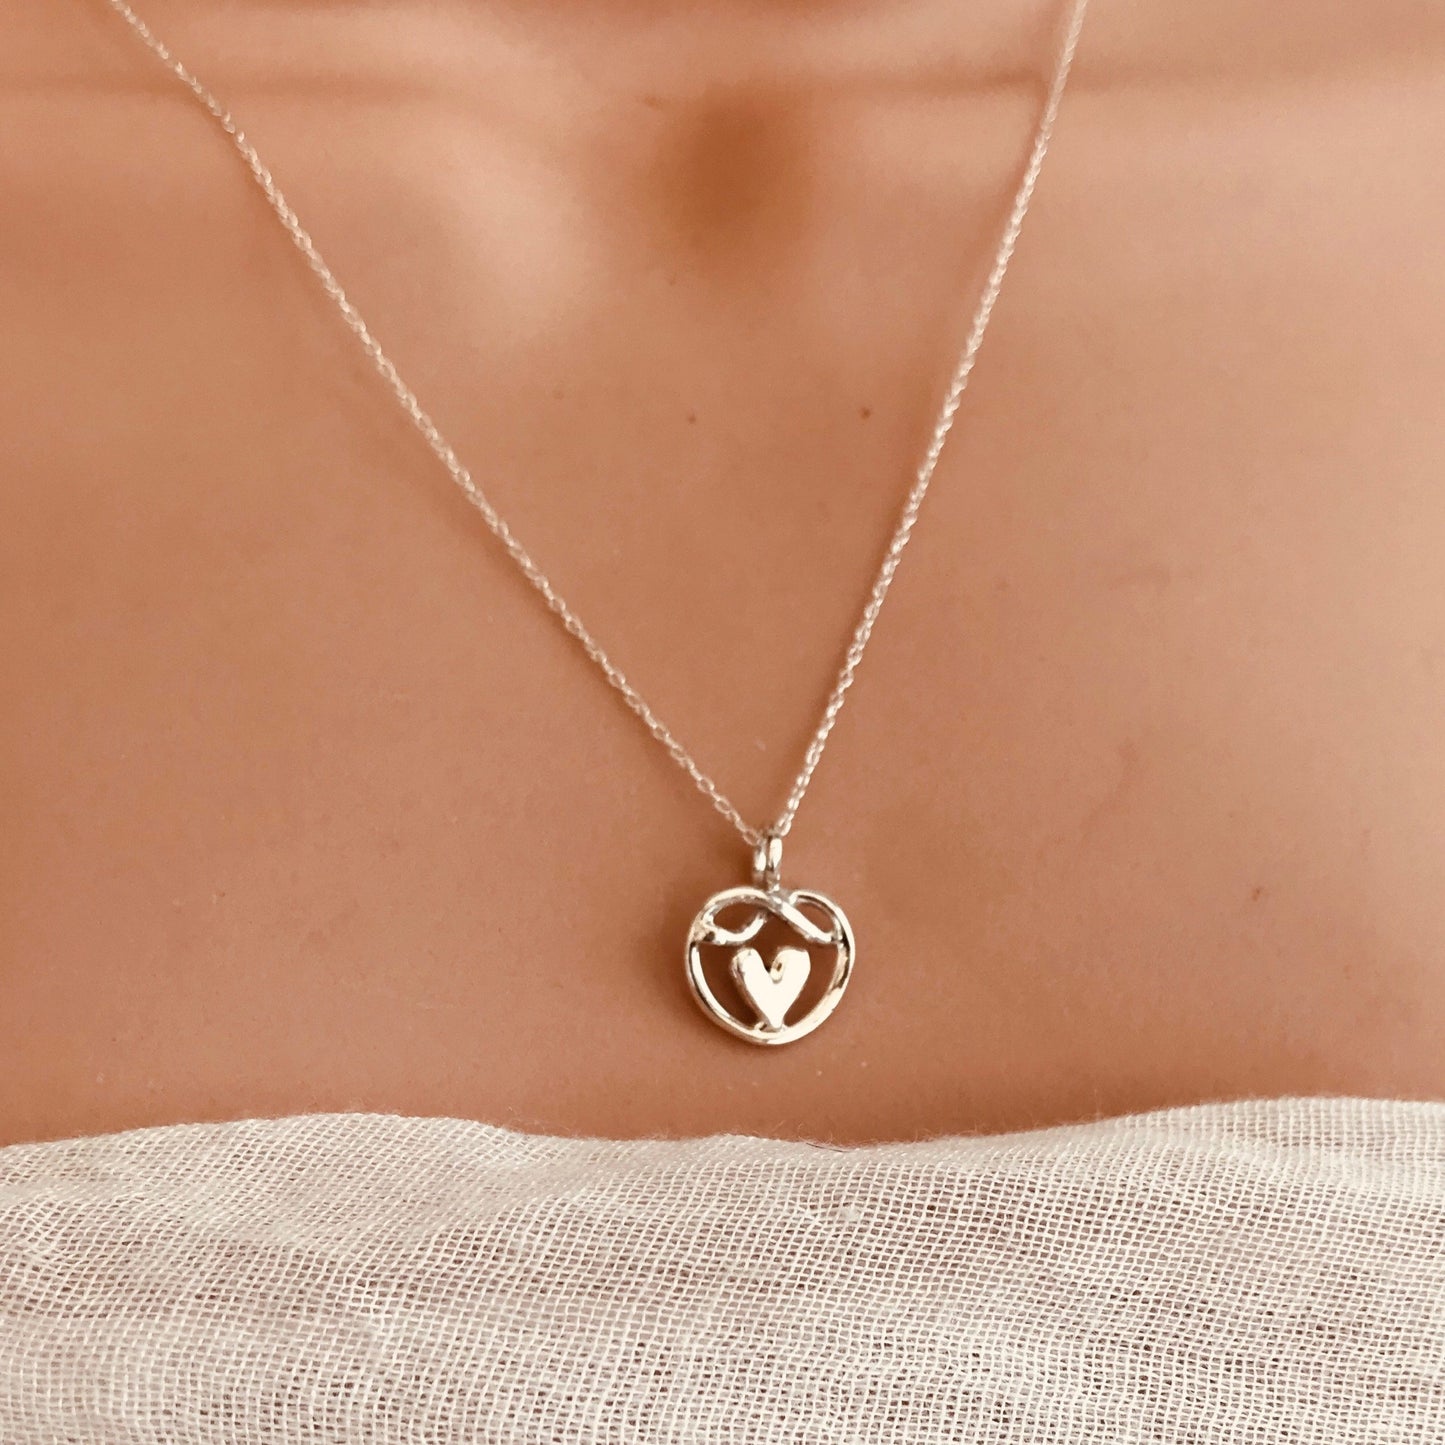 Heart friendship necklace small